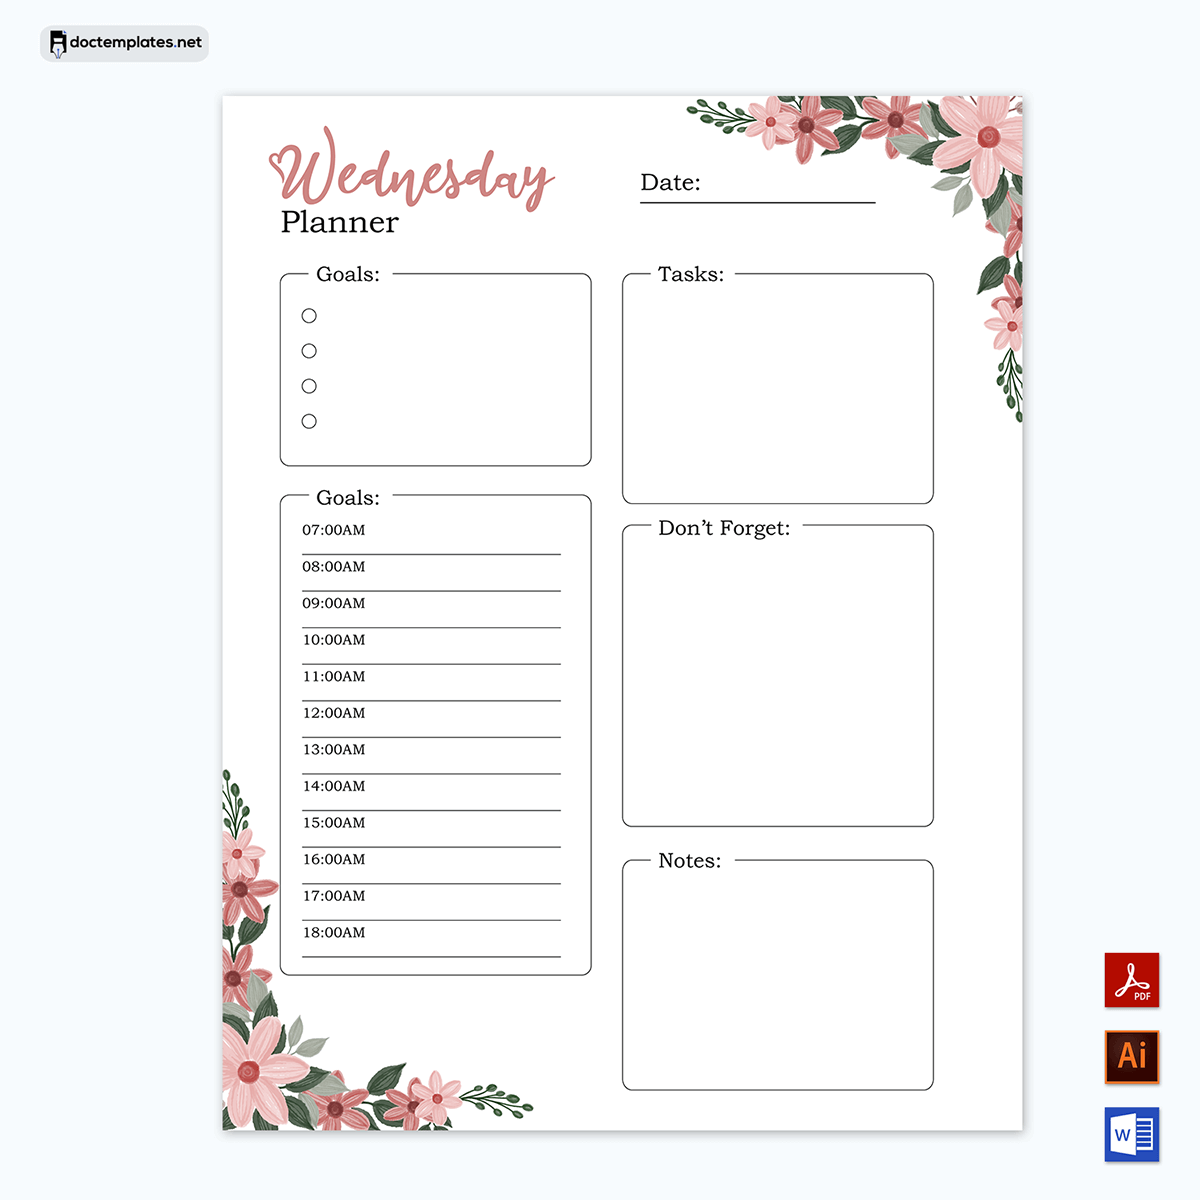 Creative Daily Planner Template